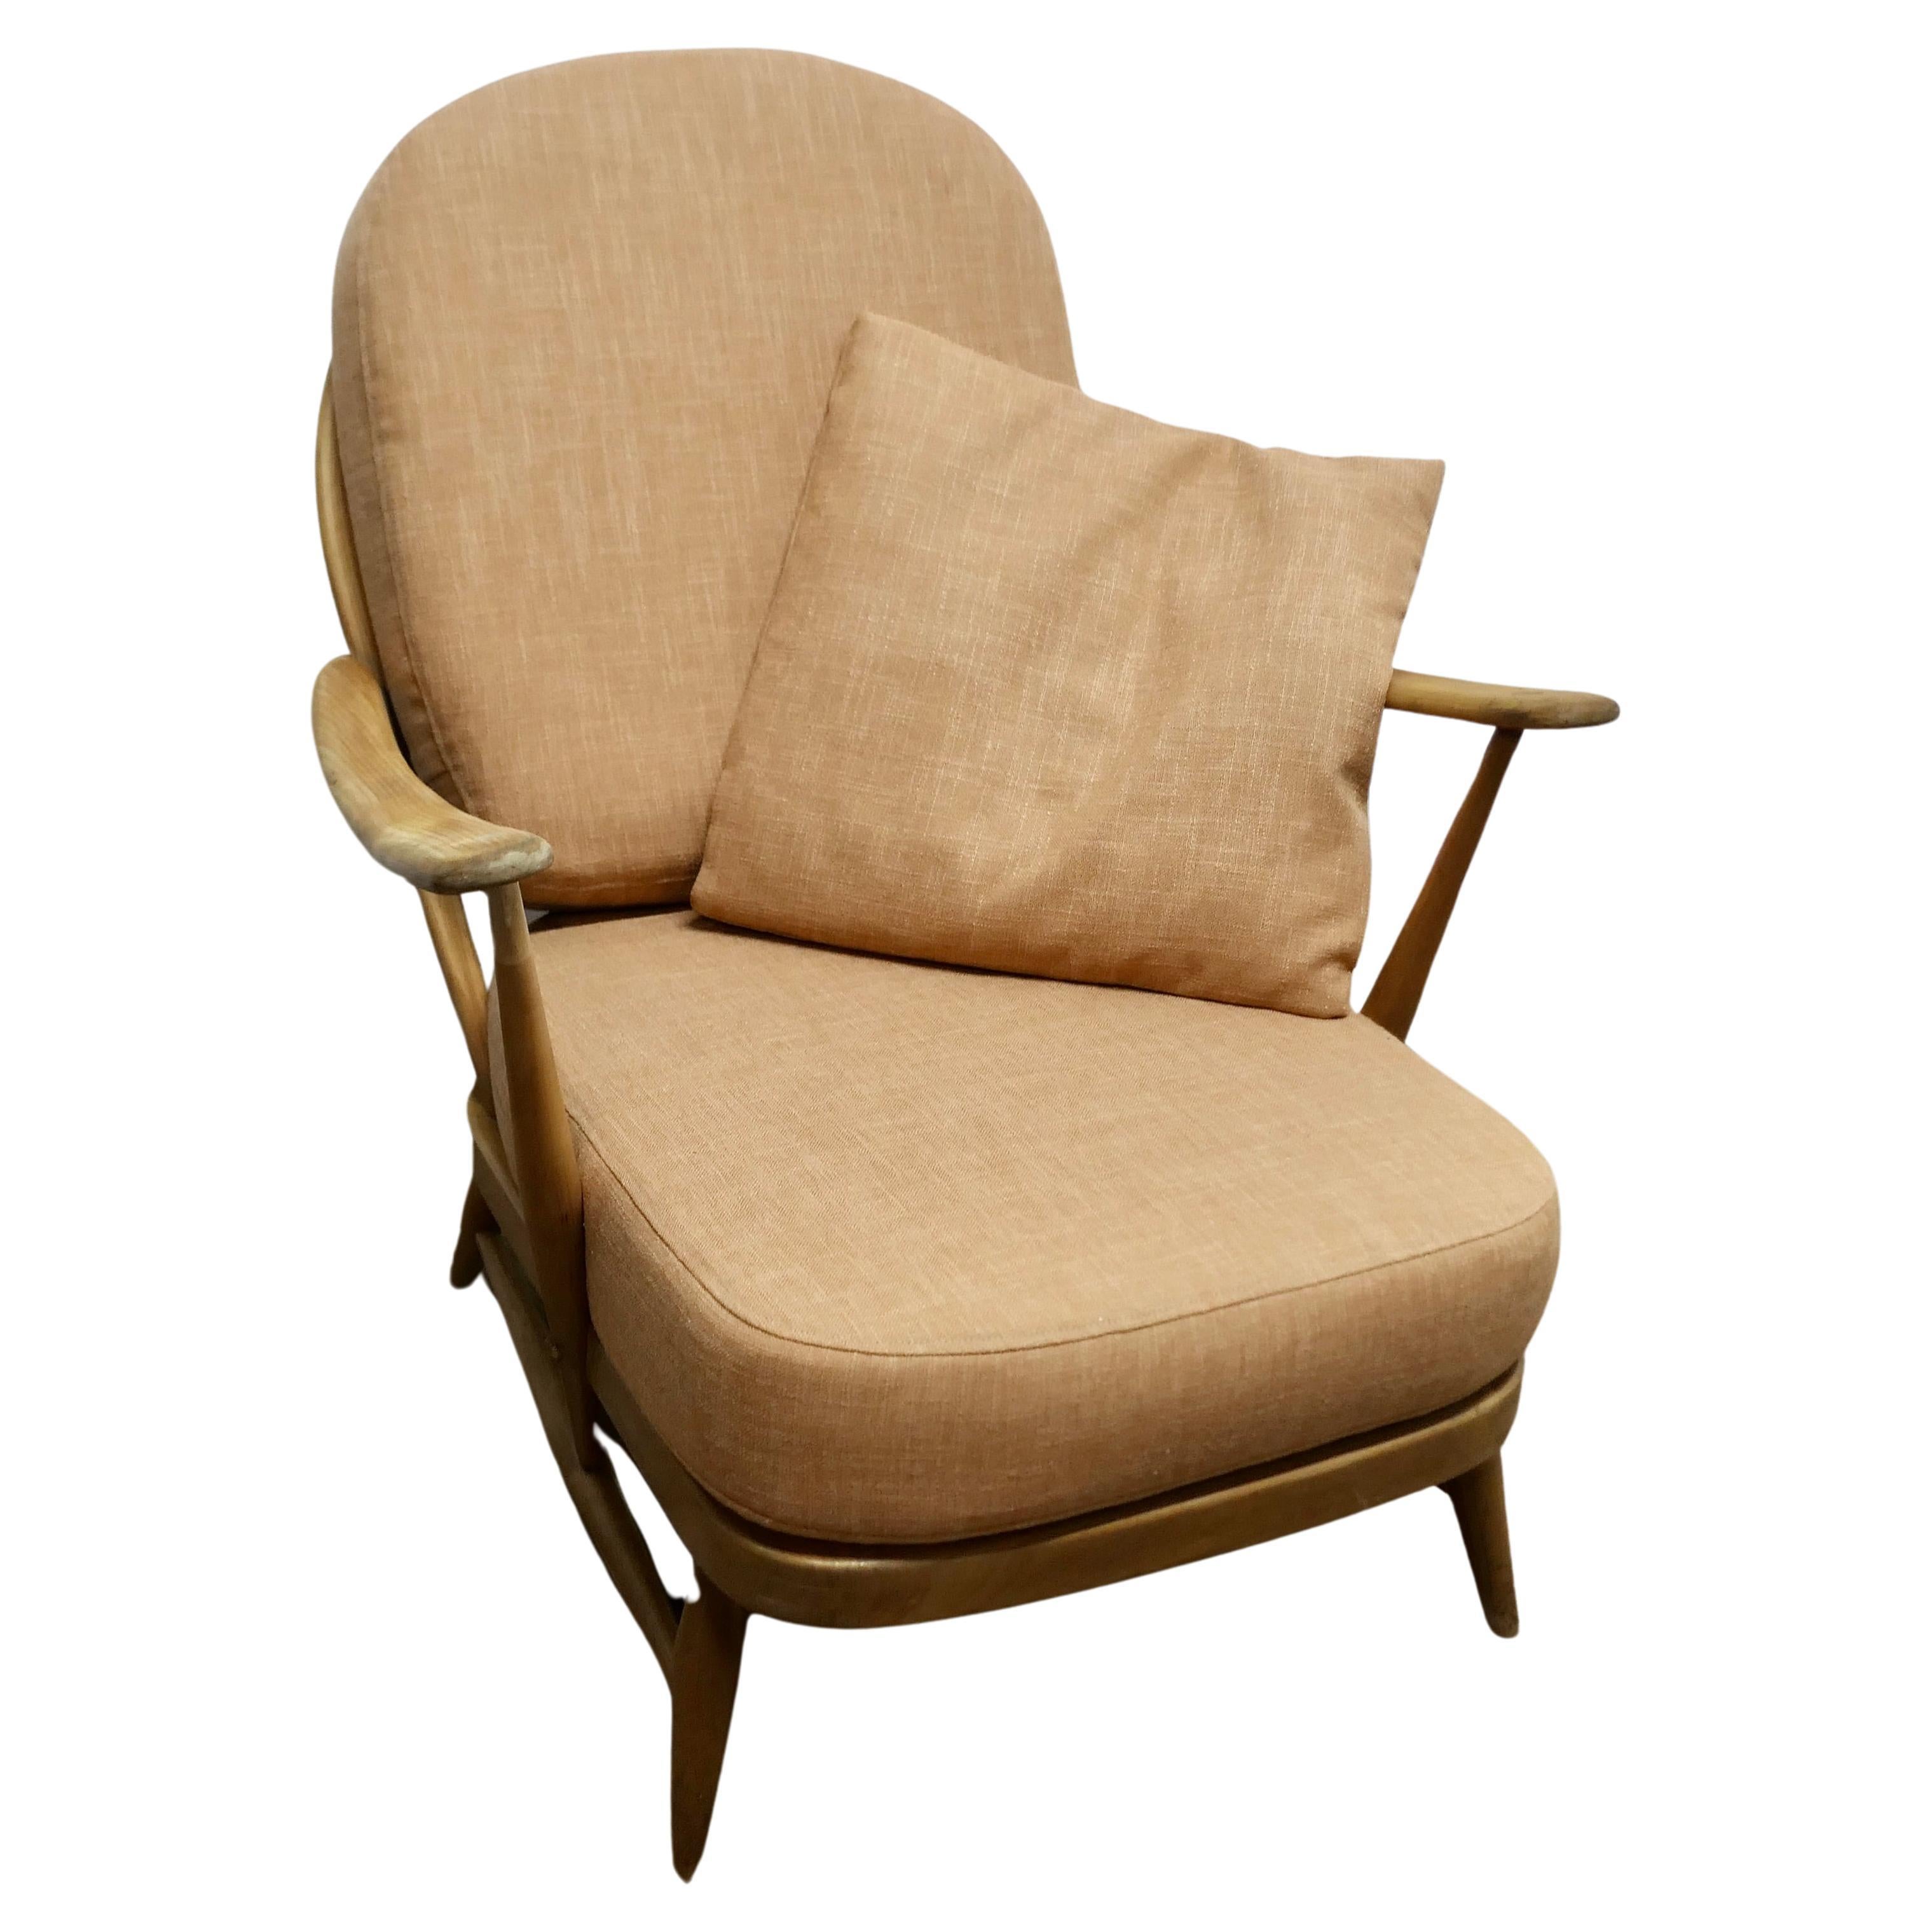 Ercol Windsor Easy Chair   The chair is a classic design and traditionally made  For Sale